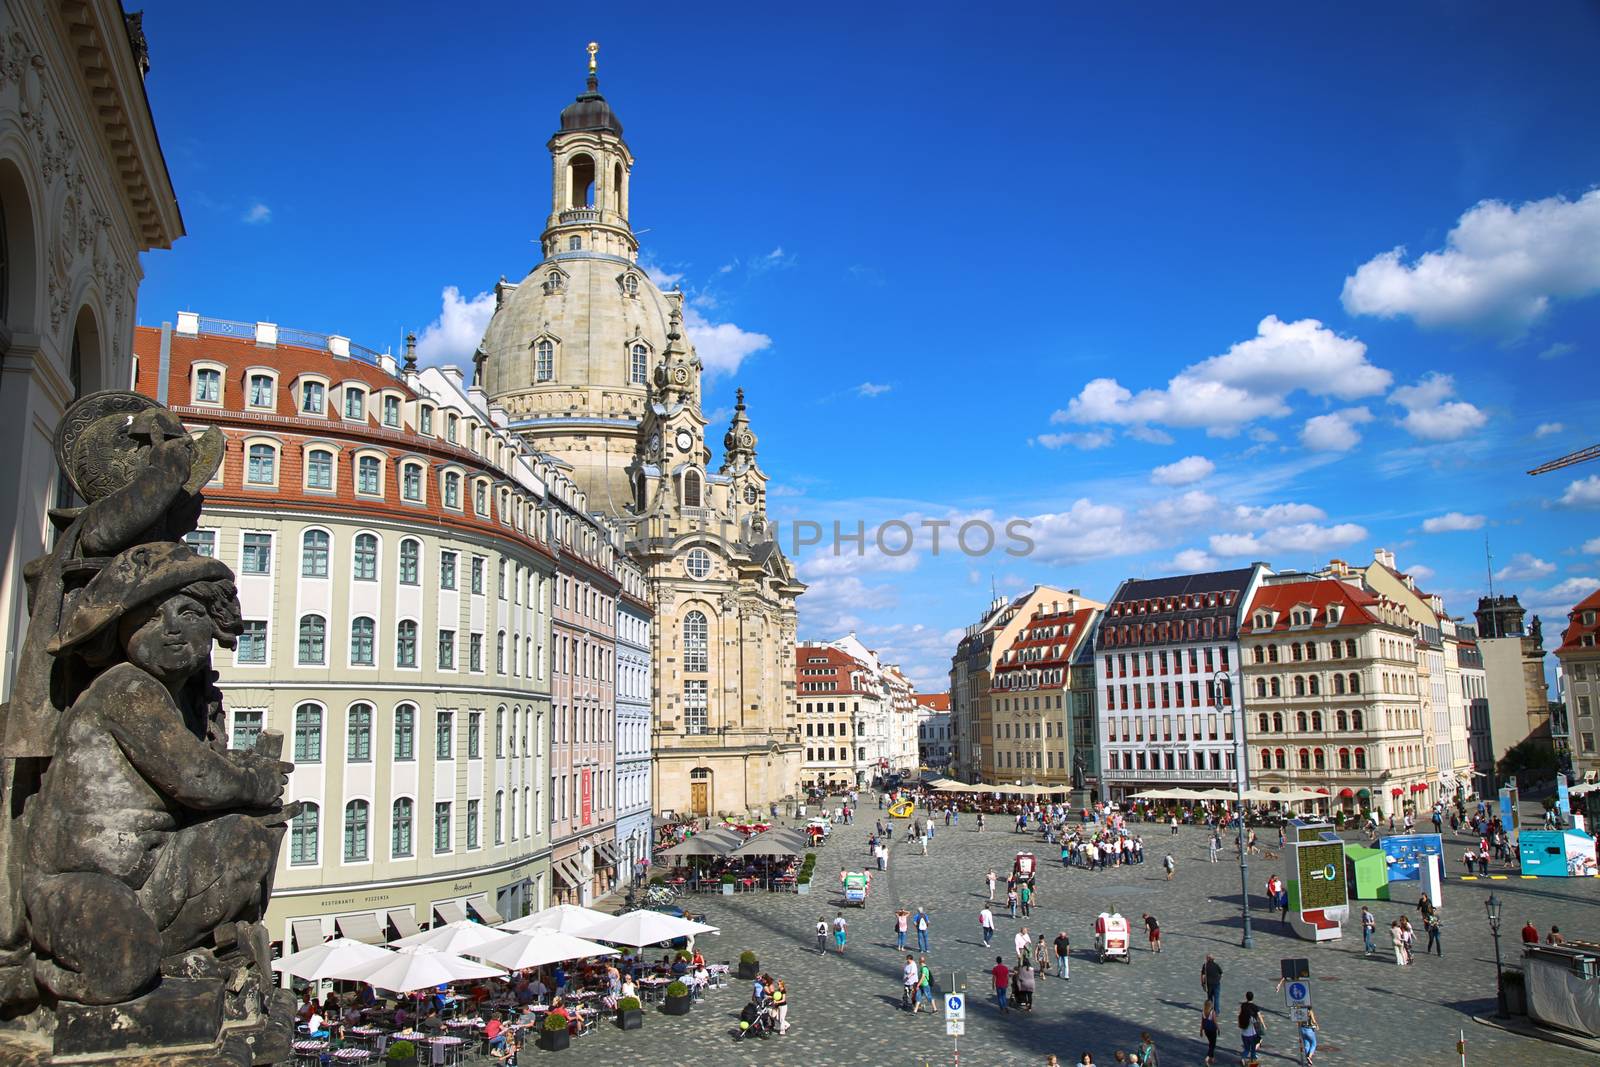 DRESDEN, GERMANY – AUGUST 13, 2016: People walk on Neumarkt Square at Frauenkirche (Our Lady church) in the center of Old town in Dresden, State of Saxony, Germany on August 13, 2016.